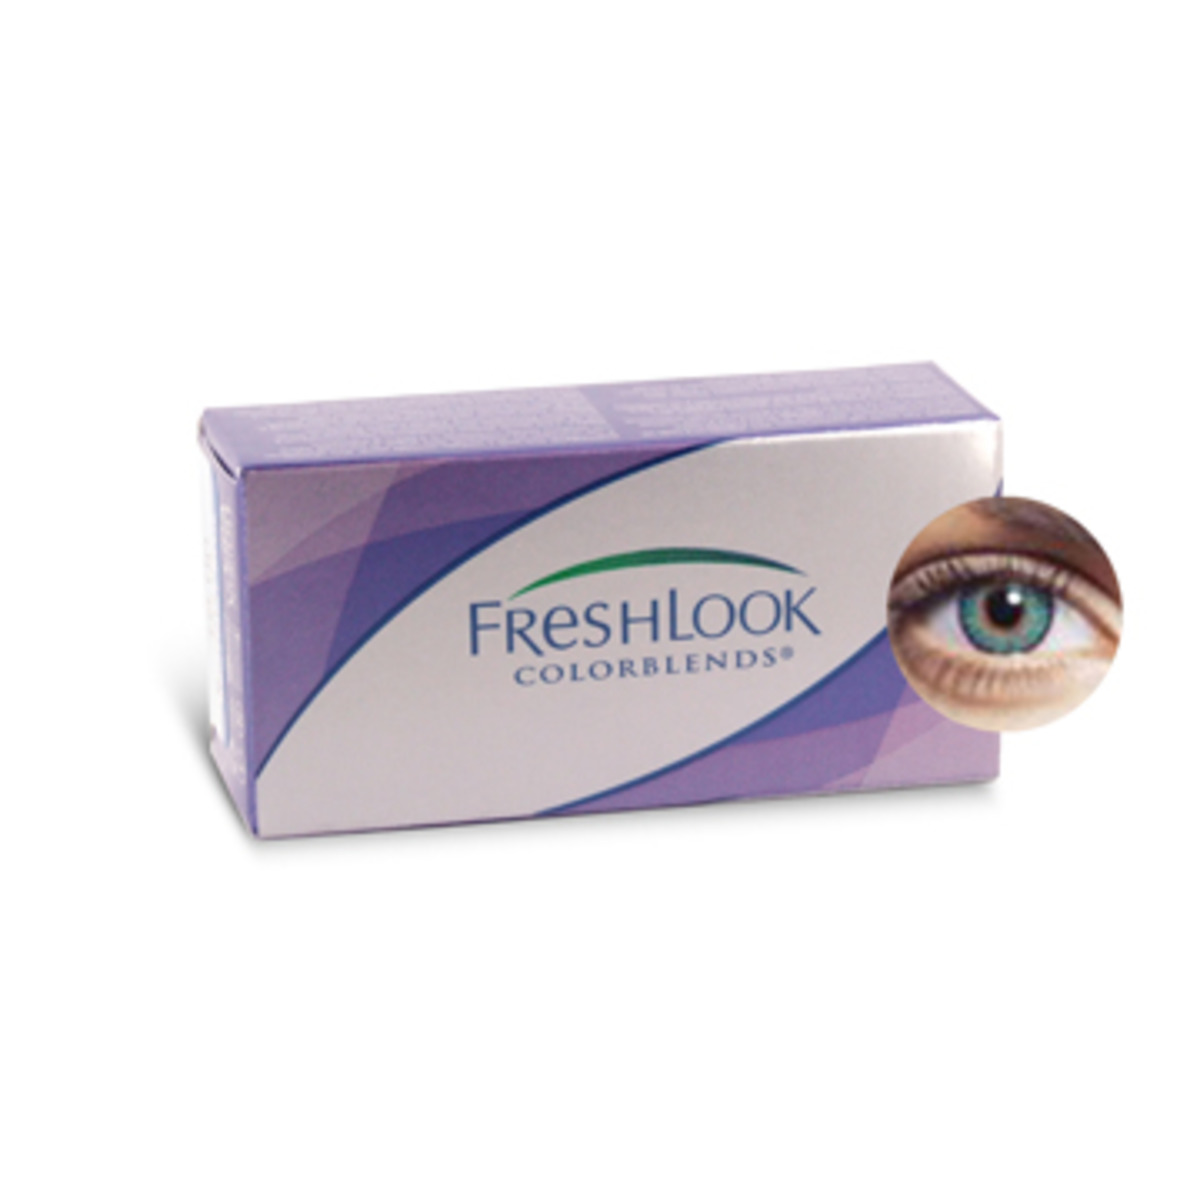 Freshlook Colorblends Turquoise